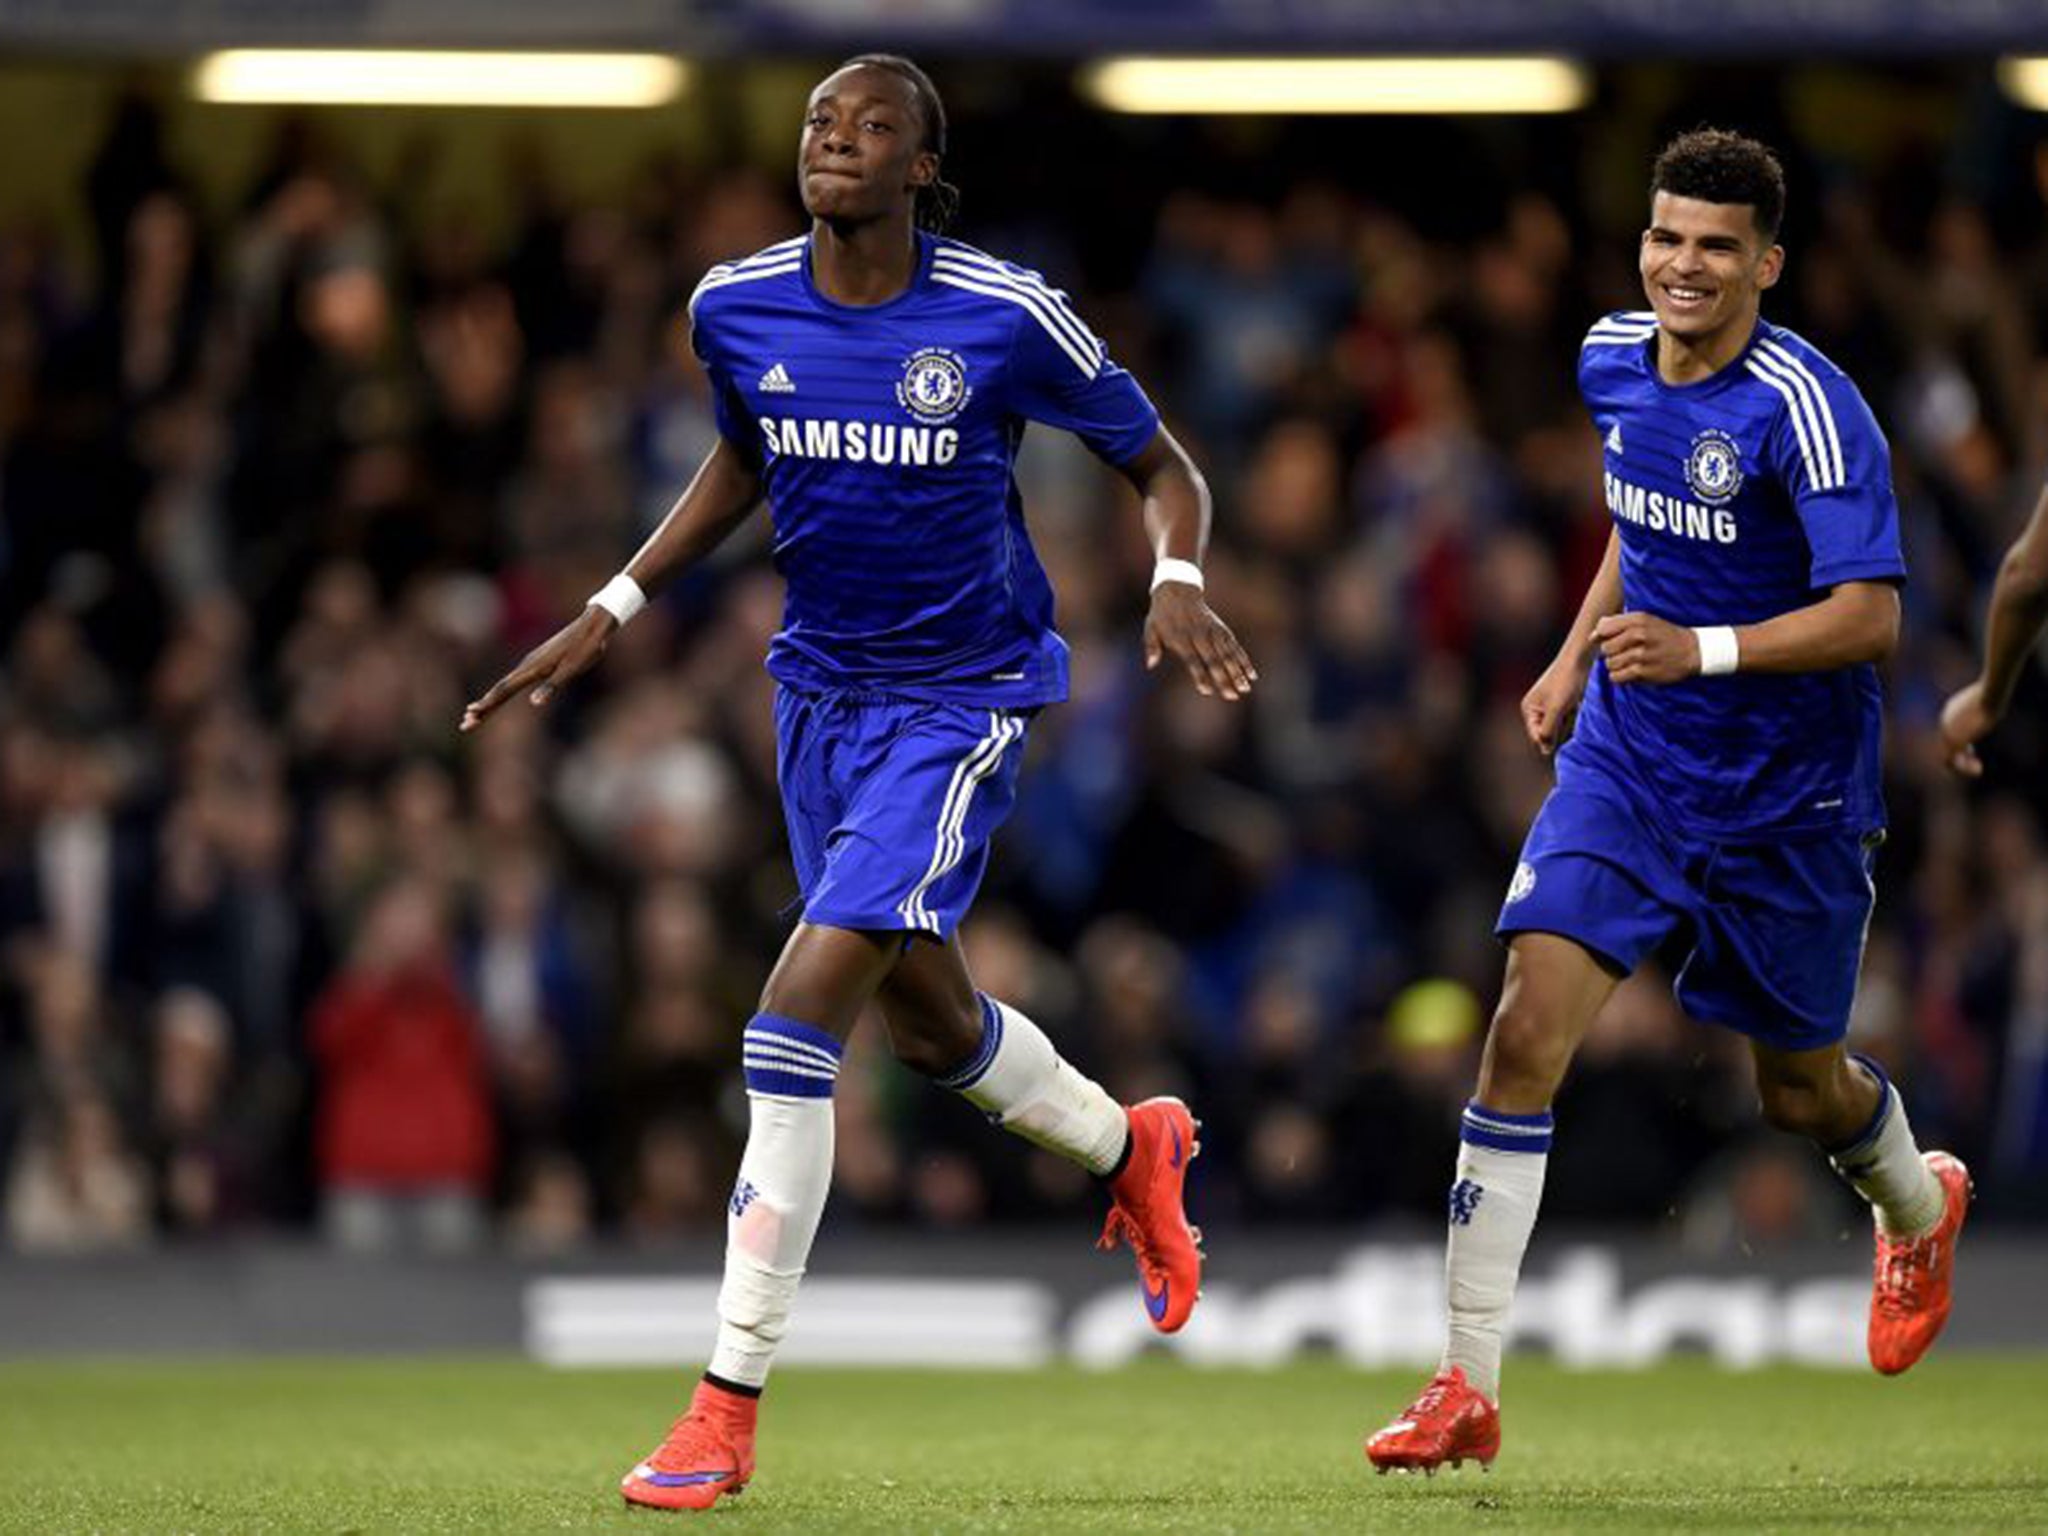 Tammy Abraham, left, celebrates after scoring Chelsea’s second goal in their victory over Manchester City